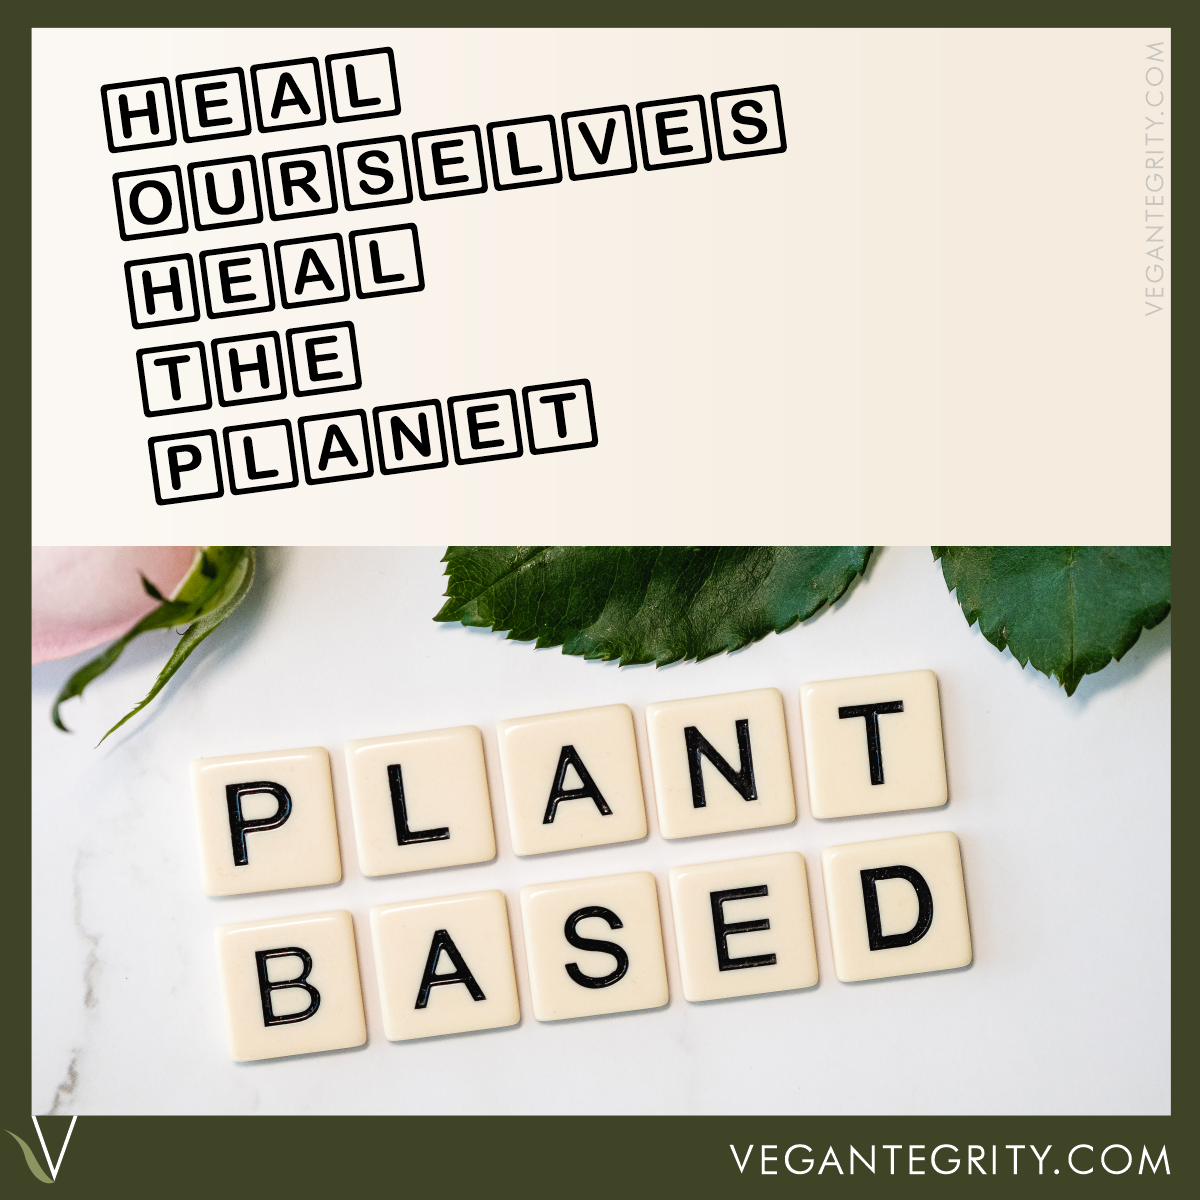 Get with the game. We can heal ourselves, and heal the planet. Green leaves and beige Scrabble tiles spelling out PLANT BASED on white background